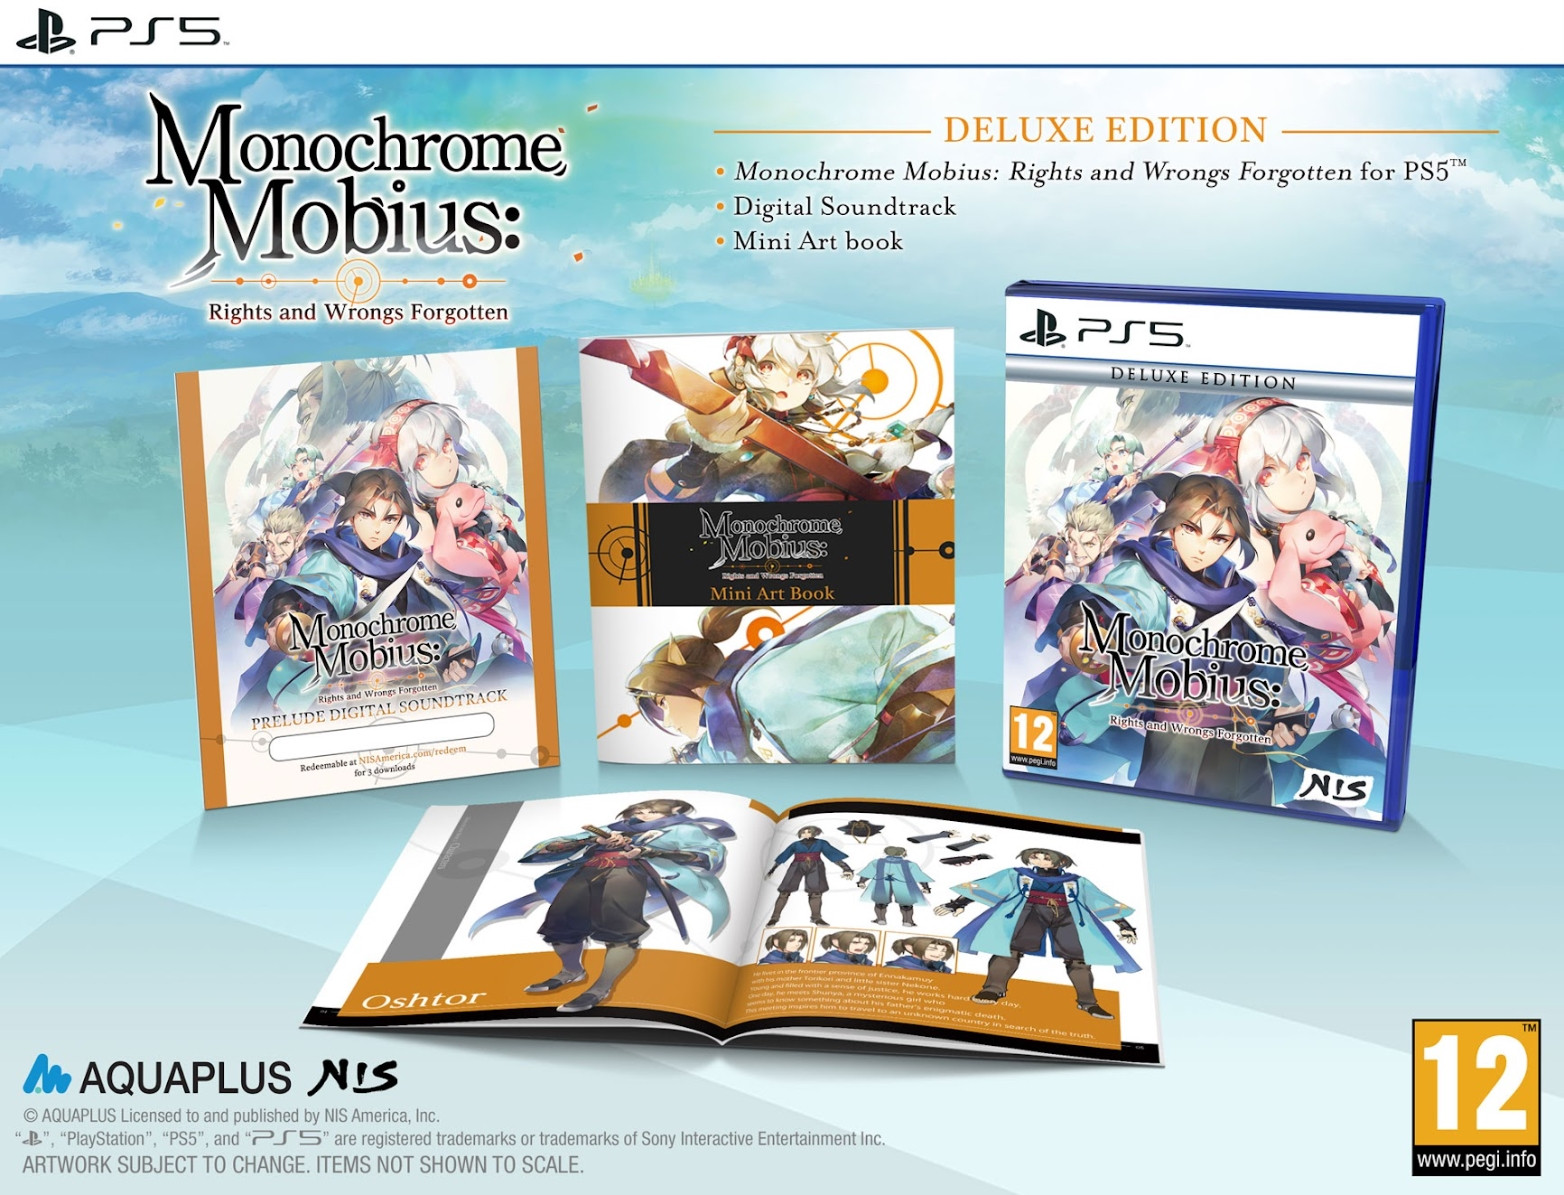 Monochrome Mobius: Rights and Wrongs Forgotten - Deluxe Edition (PS5), NIS America